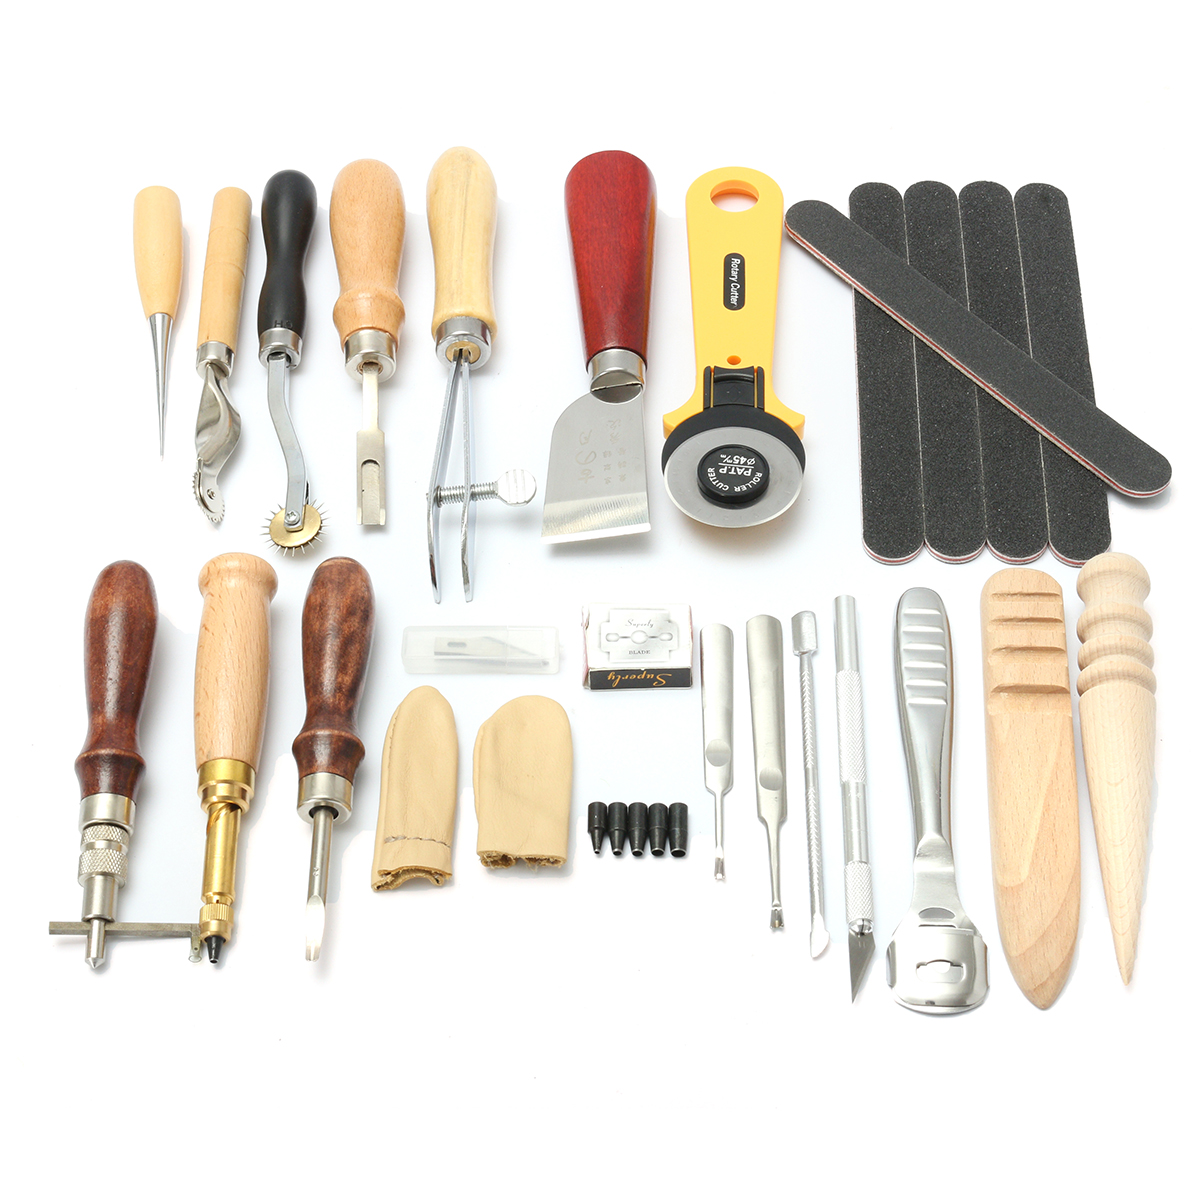 

24pcs Leather Craft Punch Tools Kit Hand Sewing Stitching Carving Work Saddle Groover